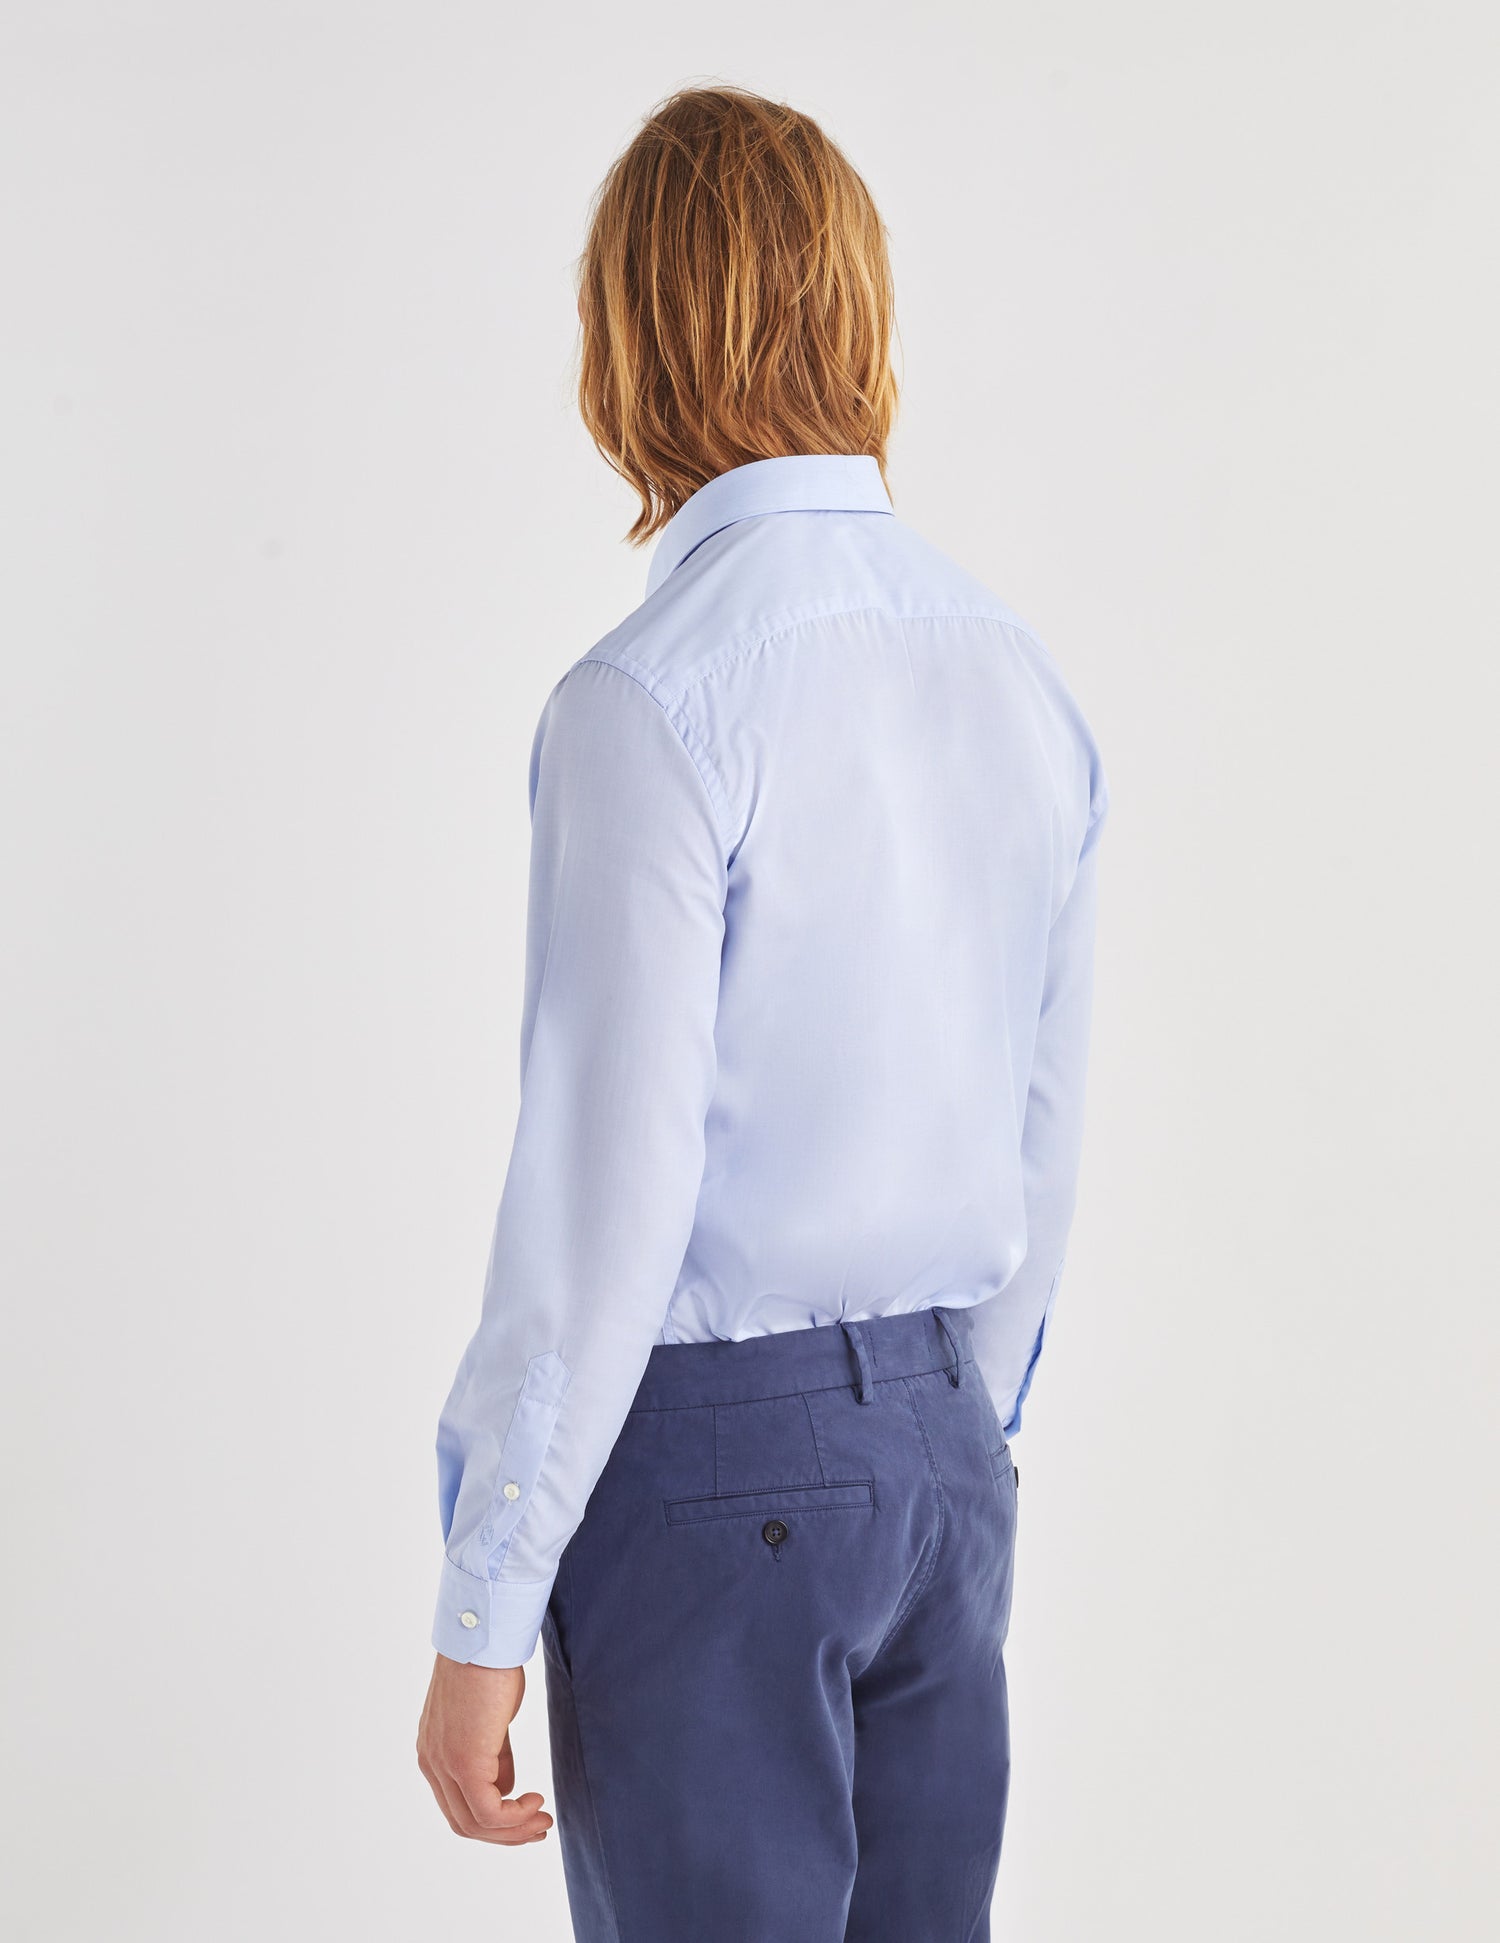 Fitted blue wrinkle-free shirt - Wire to wire - Figaret Collar#3